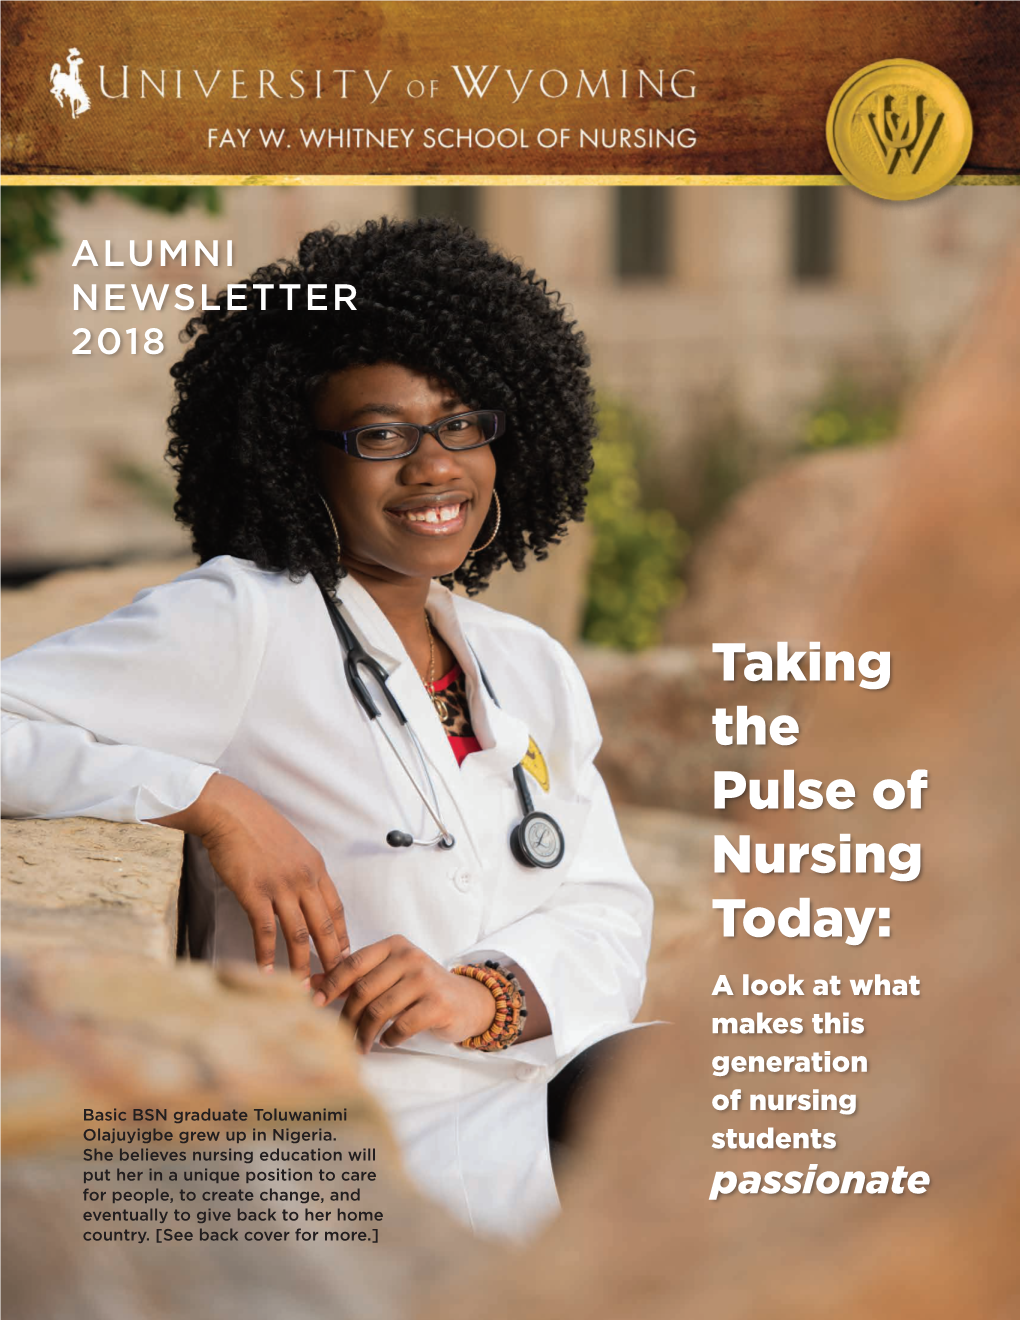 Taking the Pulse of Nursing Today: a Look at What Makes This Generation